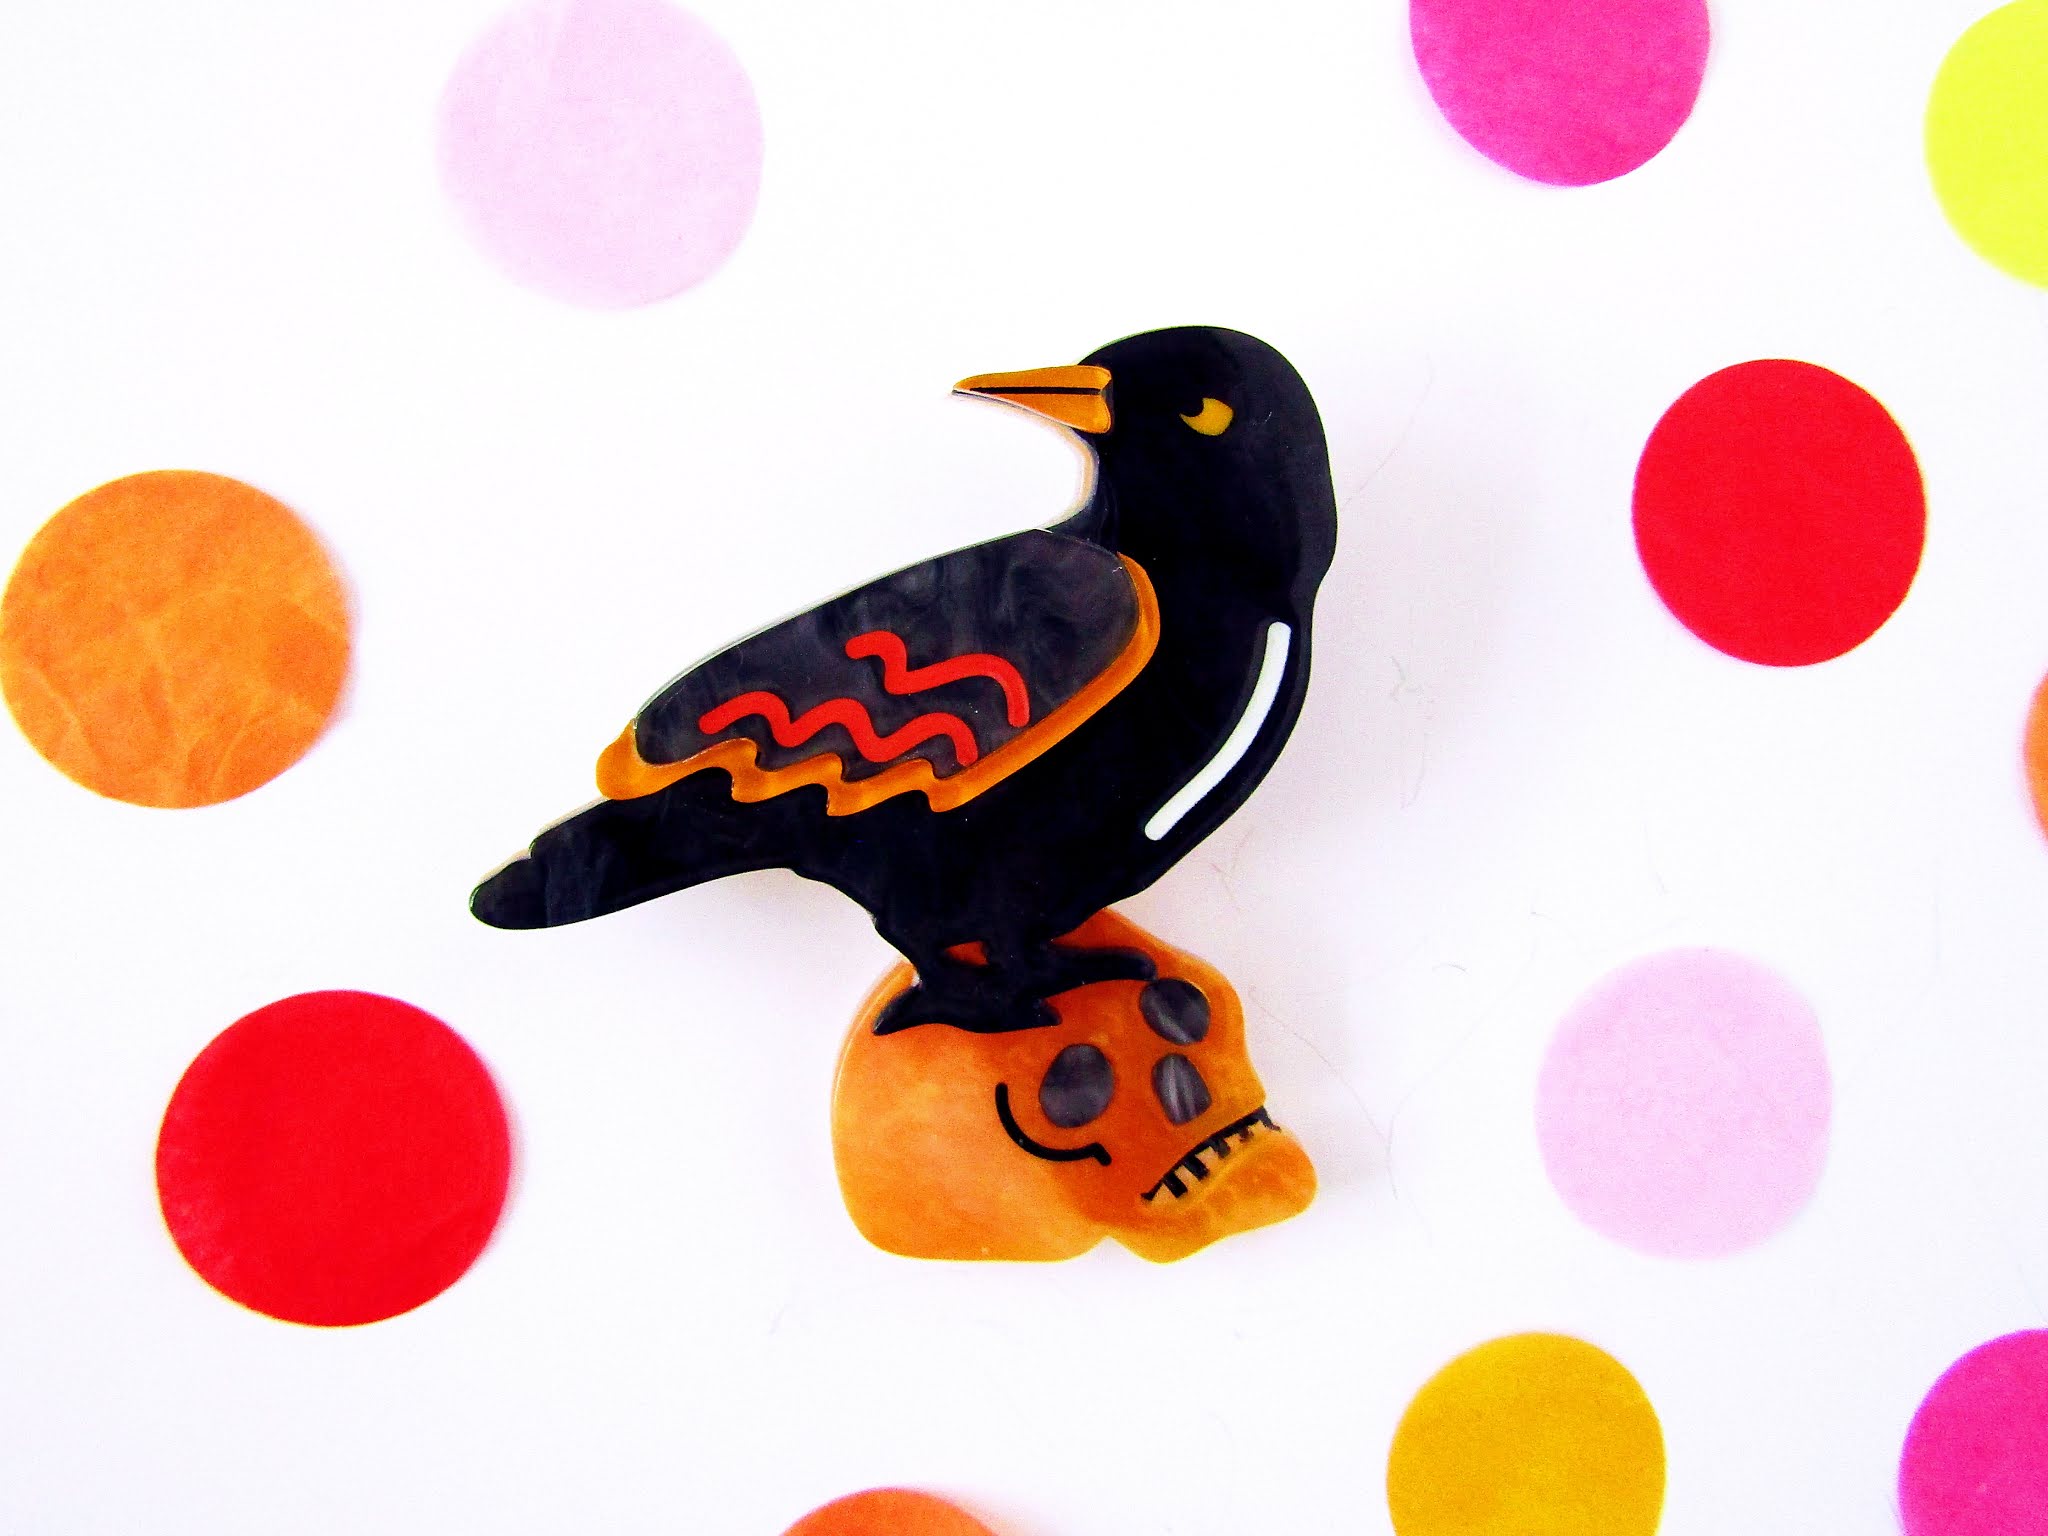 A photo of an Erstwilder black raven brooch on a white background surrounded by colourful confetti. The brooch features a black resin raven with orange markings on its wing perched on the top of an orange marbled resin skull.